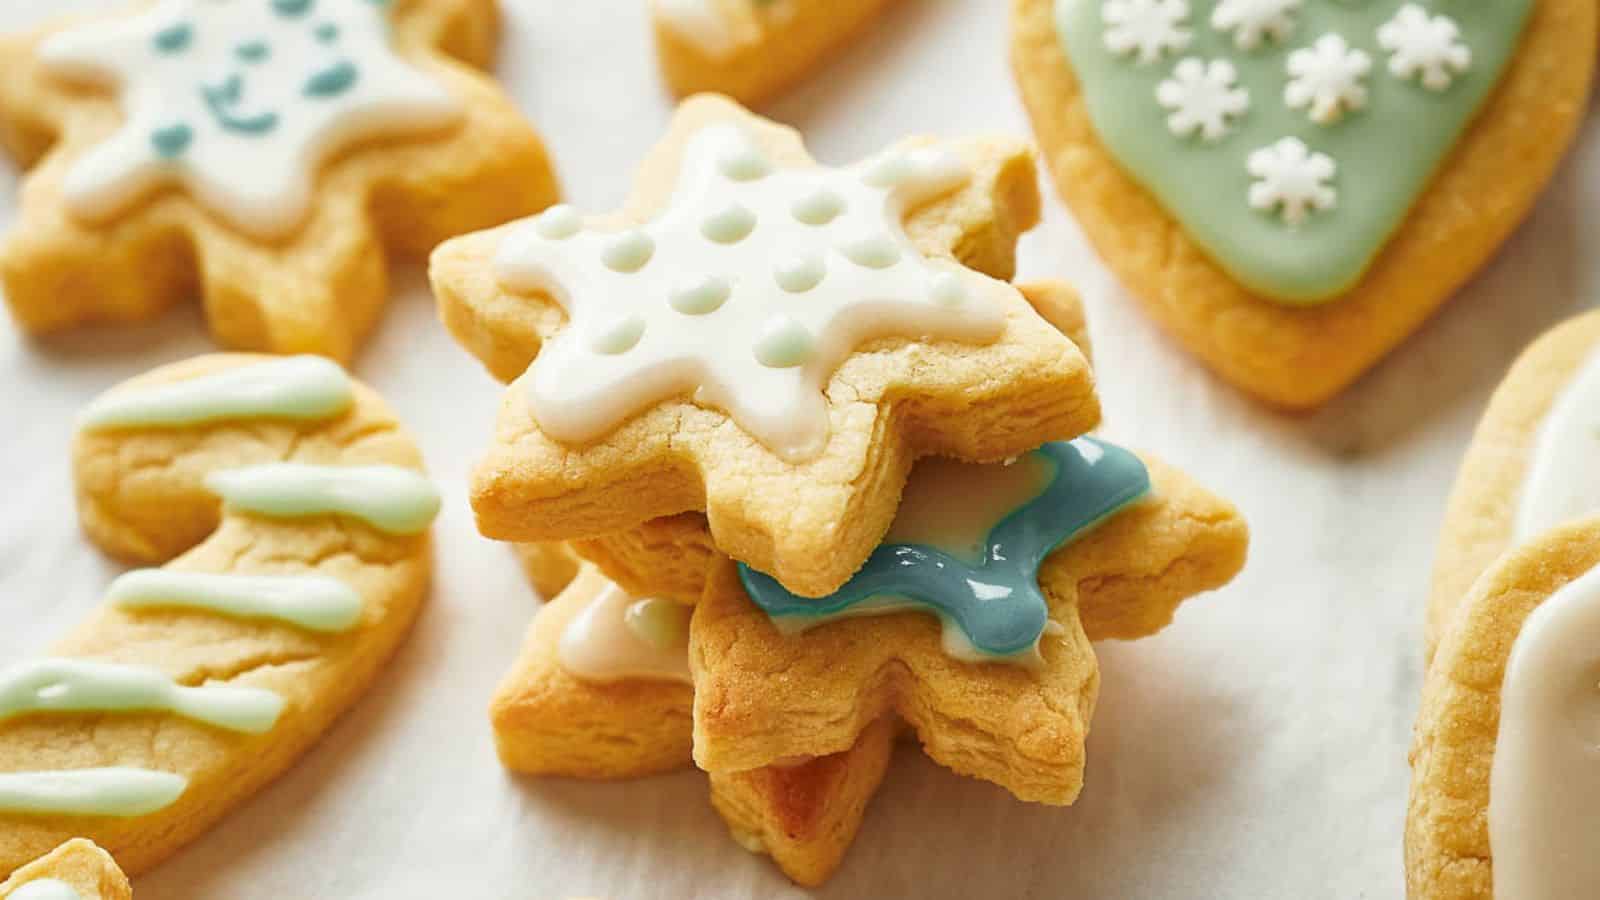 A group of cookies decorated with icing and snowflakes.